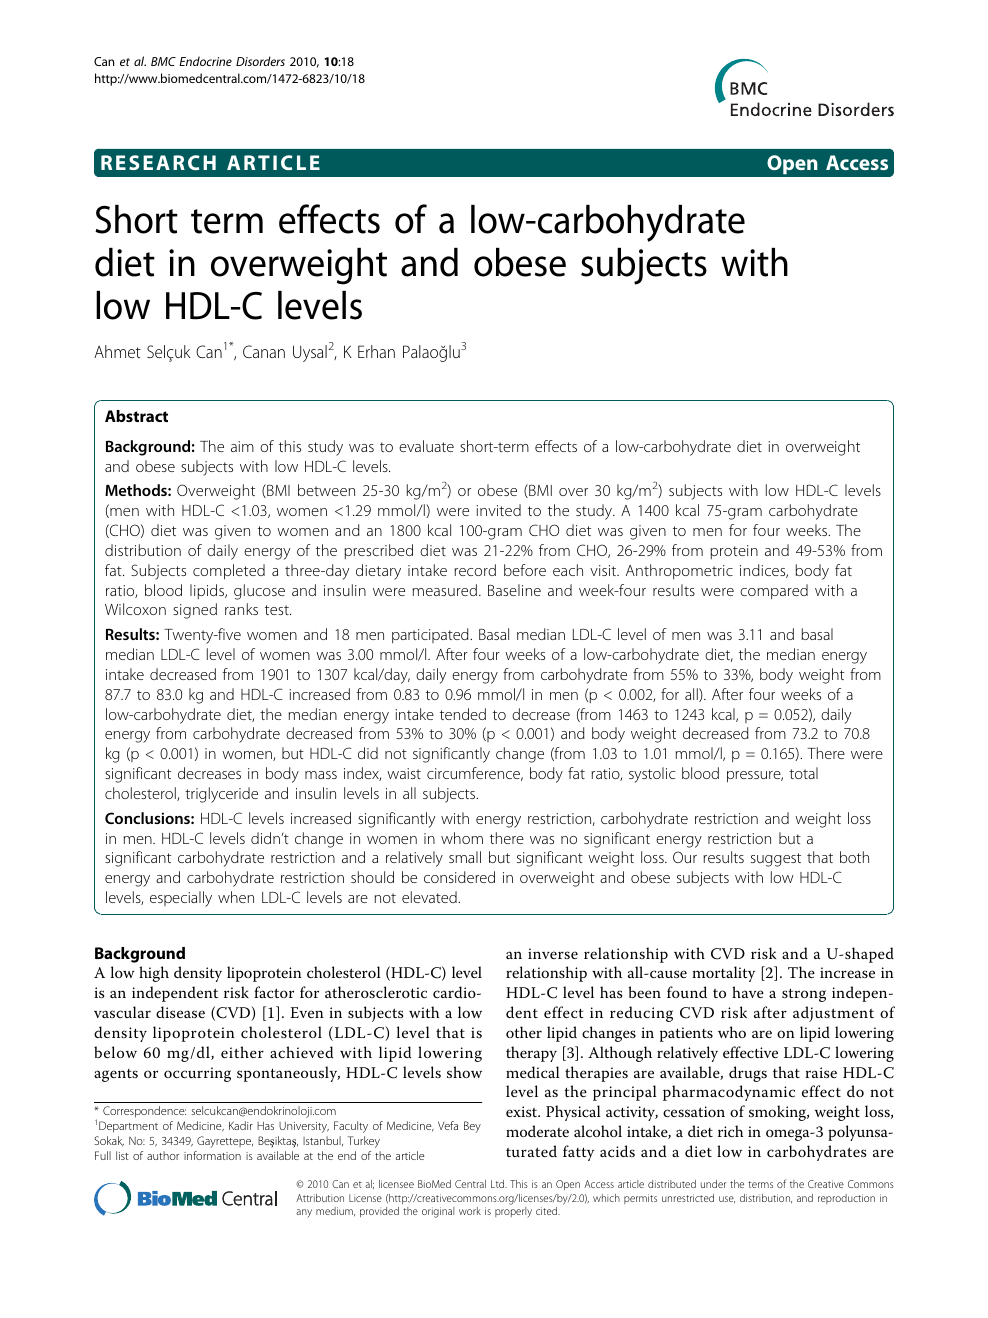 Short Term Effects Of A Low Carbohydrate Diet In Overweight And Obese Subjects With Low Hdl C Levels Topic Of Research Paper In Health Sciences Download Scholarly Article Pdf And Read For Free